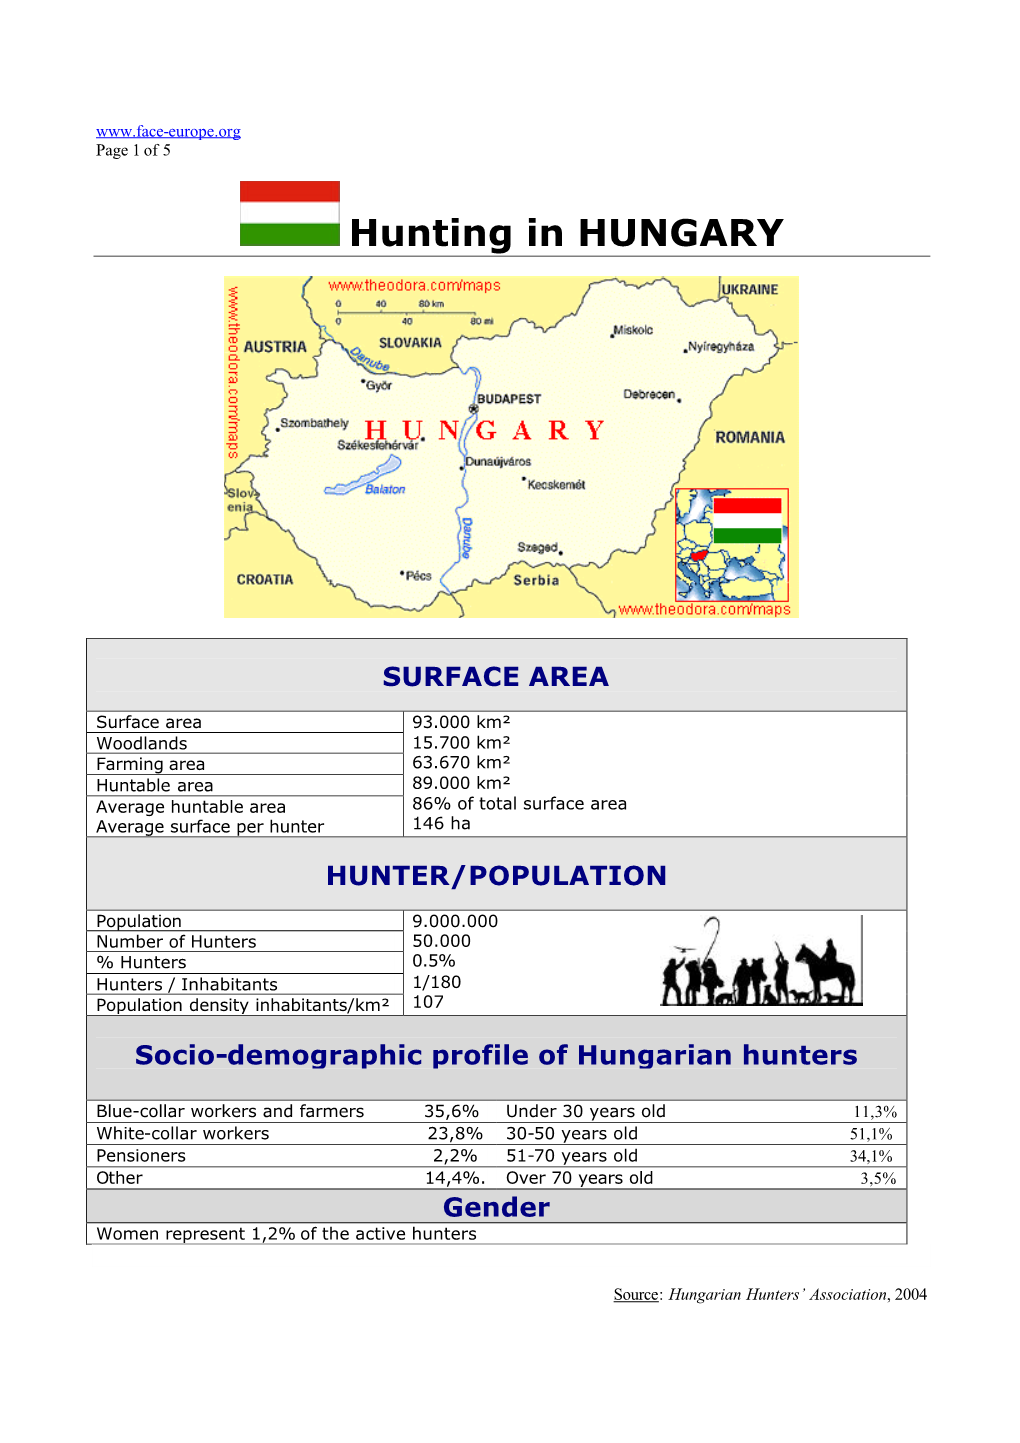 Hunting in HUNGARY